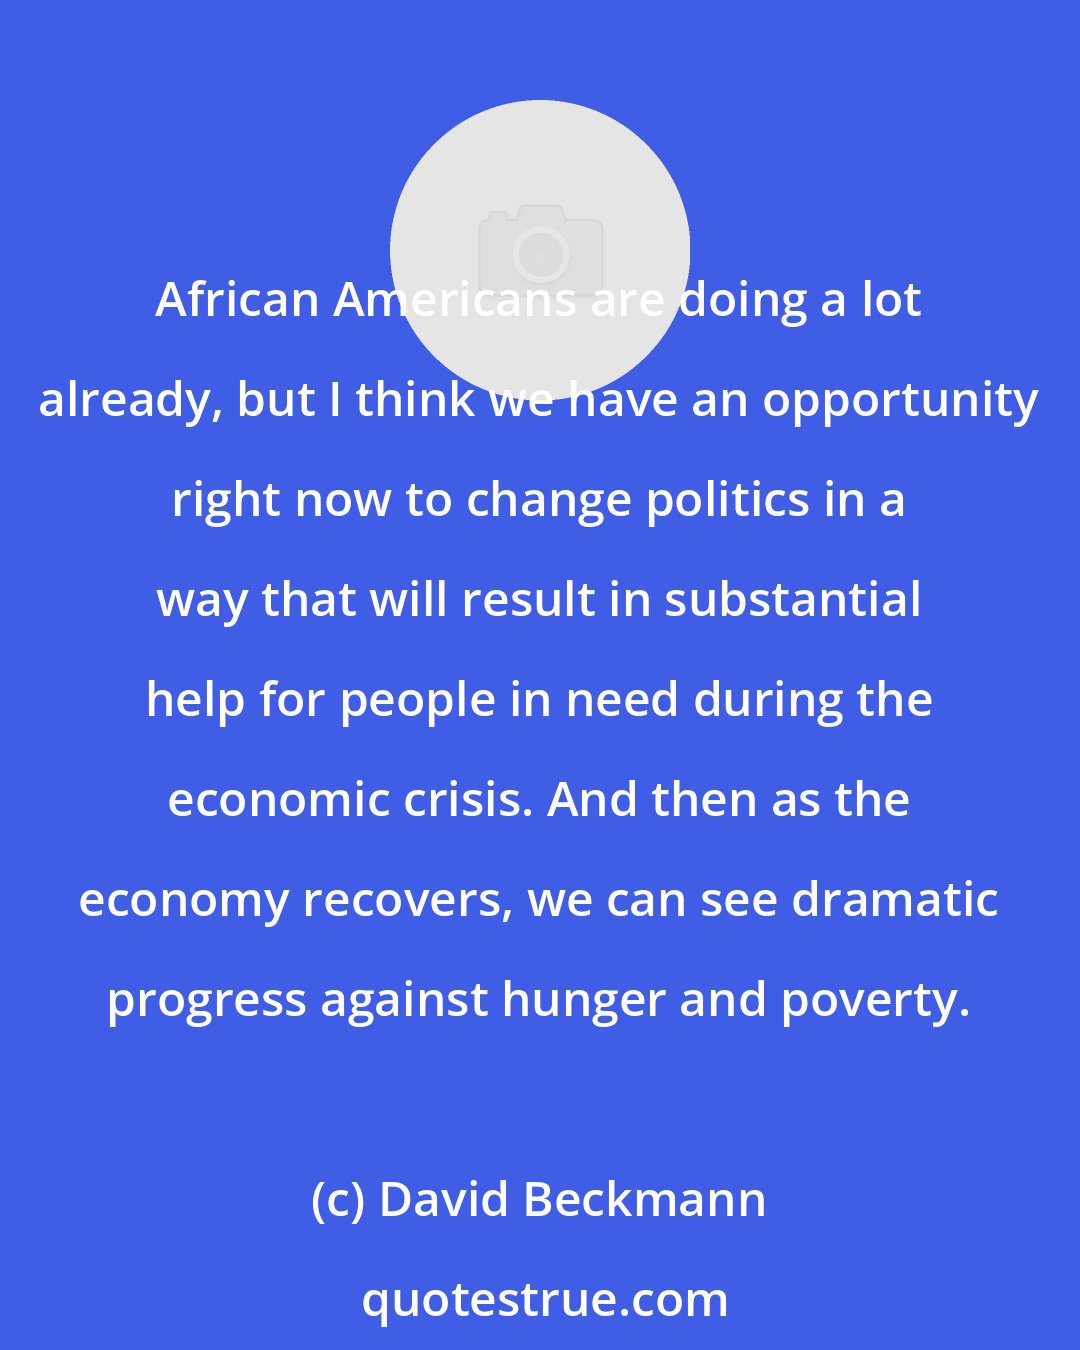 David Beckmann: African Americans are doing a lot already, but I think we have an opportunity right now to change politics in a way that will result in substantial help for people in need during the economic crisis. And then as the economy recovers, we can see dramatic progress against hunger and poverty.